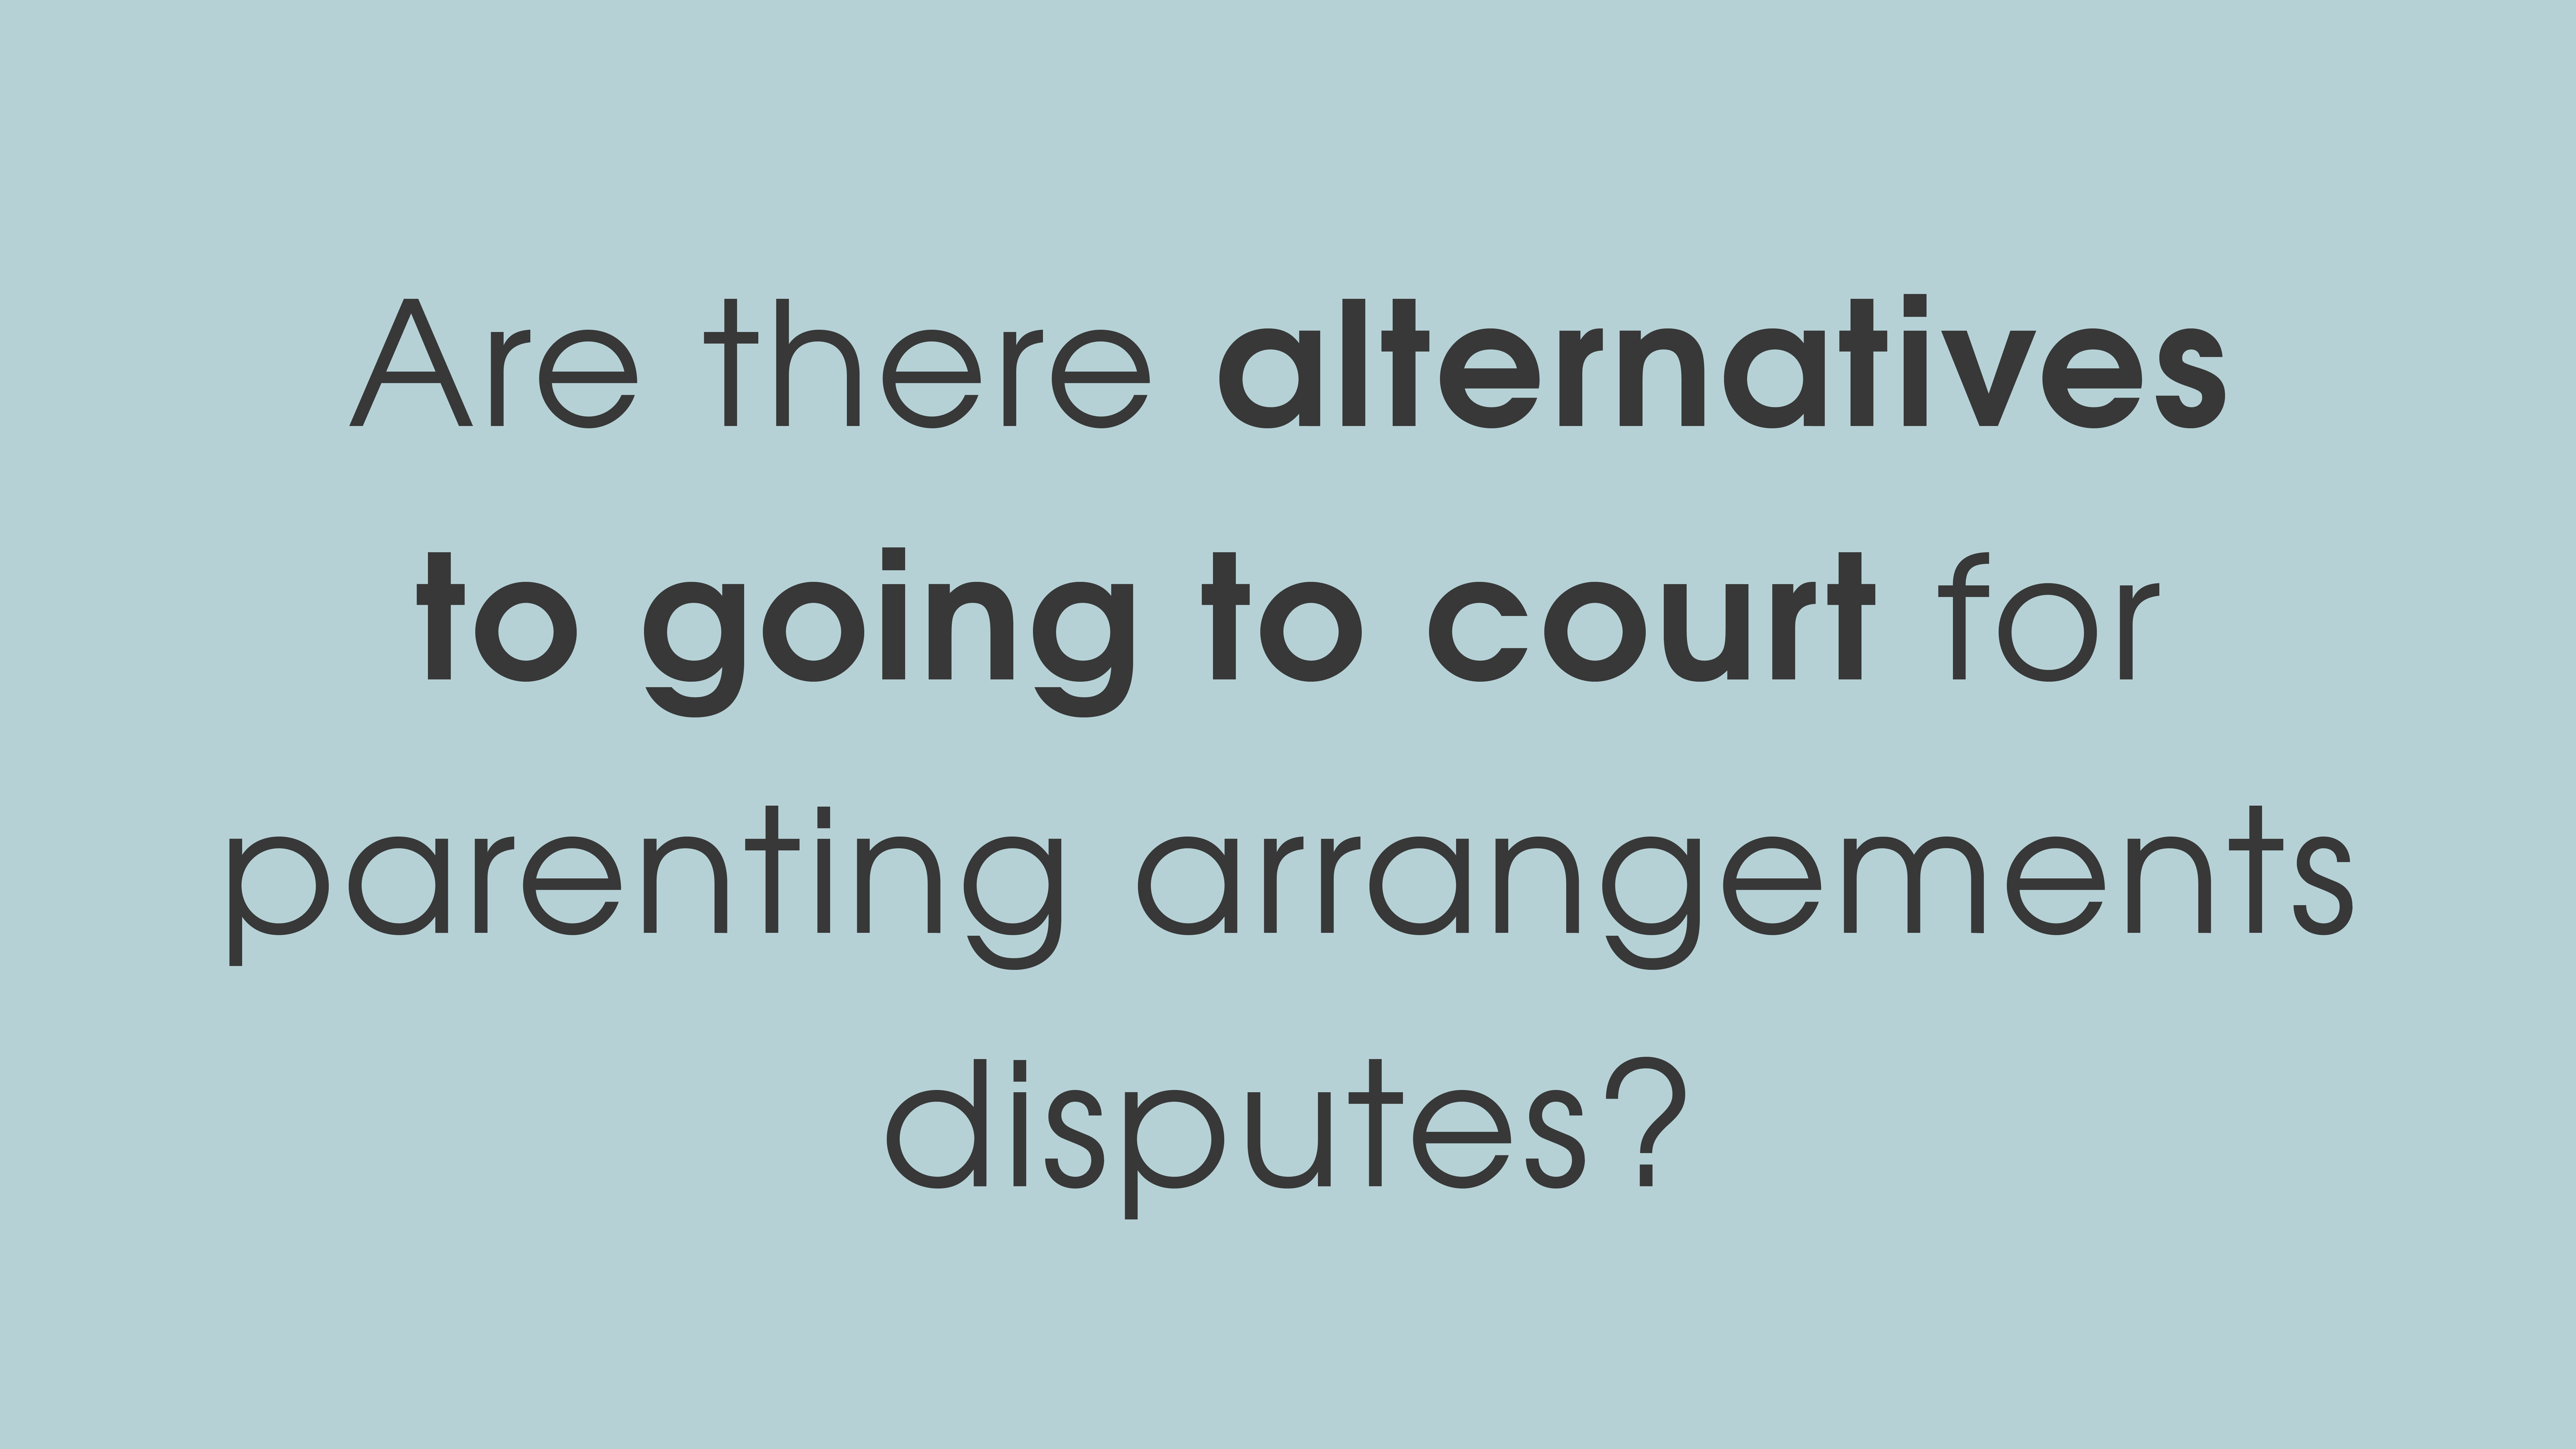 Are there alternatives to going to court for parenting arrangements